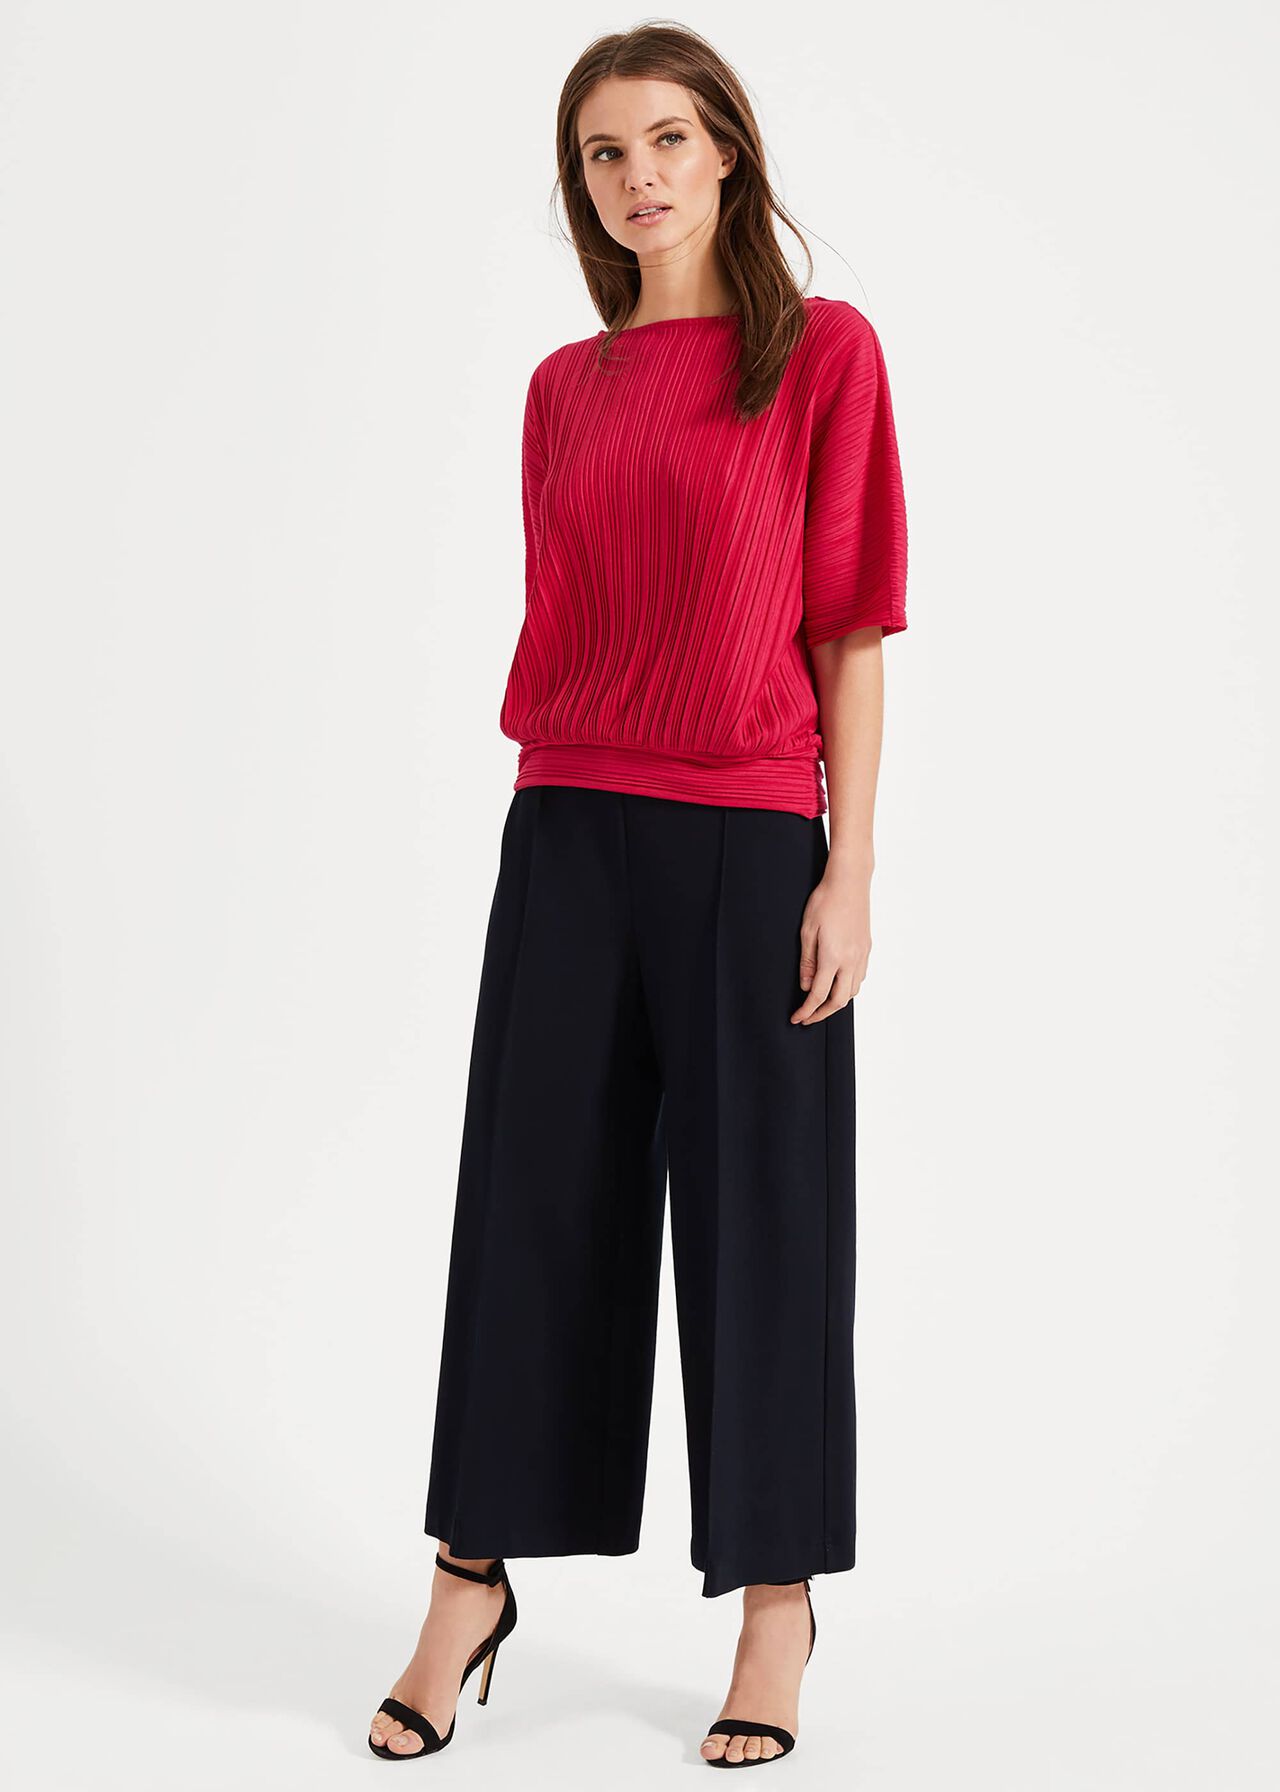 Pacey Pleat Top | Phase Eight